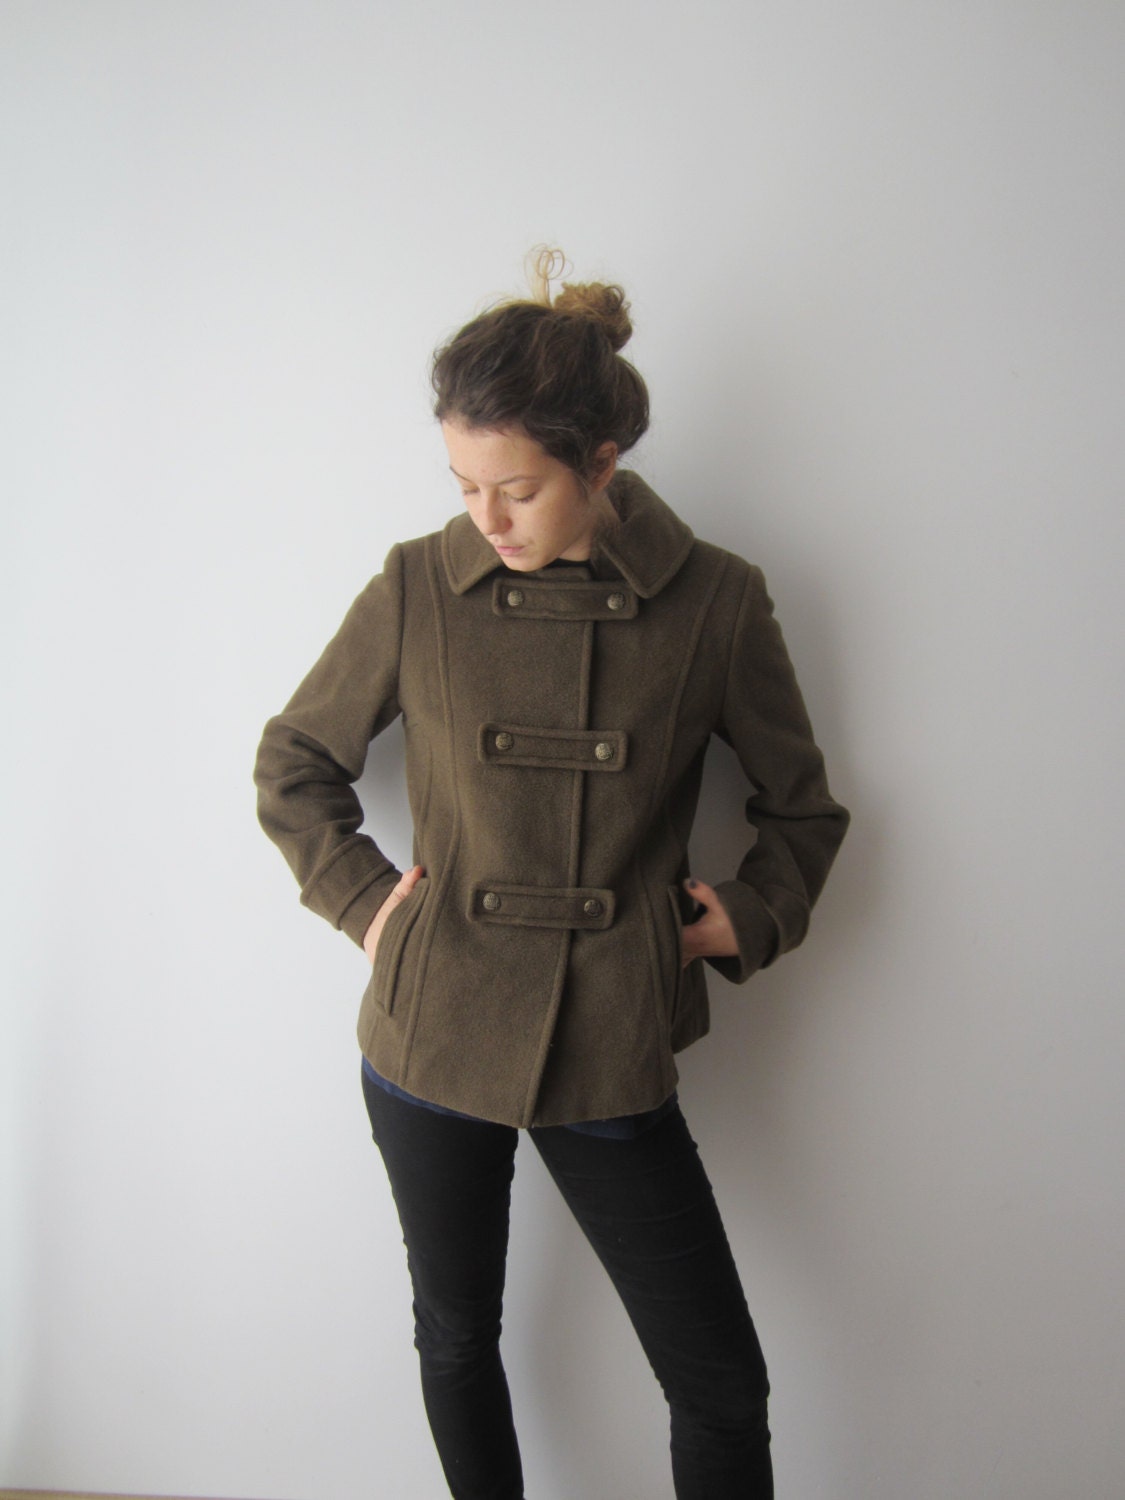 Vintage Wool Blend Cashmere Jacket Moss Green Cropped Coat Marching Band Warm Medium Size Autumn Winter St. Johns Bay